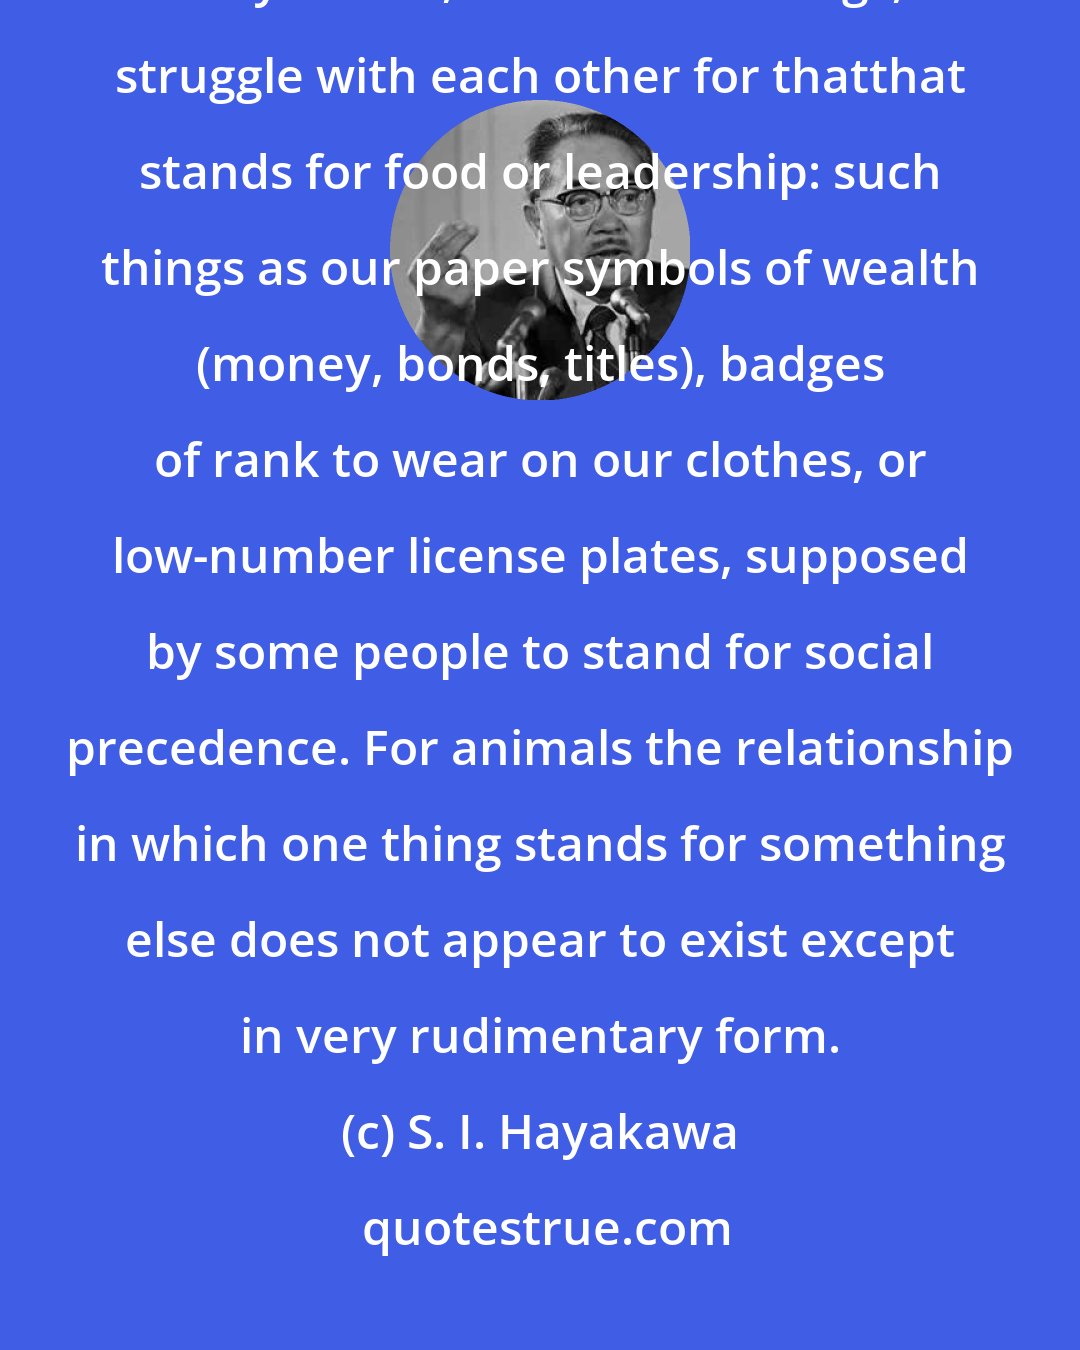 S. I. Hayakawa: Animals struggle with each other for food or for leadership, but they do not, like human beings, struggle with each other for thatthat stands for food or leadership: such things as our paper symbols of wealth (money, bonds, titles), badges of rank to wear on our clothes, or low-number license plates, supposed by some people to stand for social precedence. For animals the relationship in which one thing stands for something else does not appear to exist except in very rudimentary form.